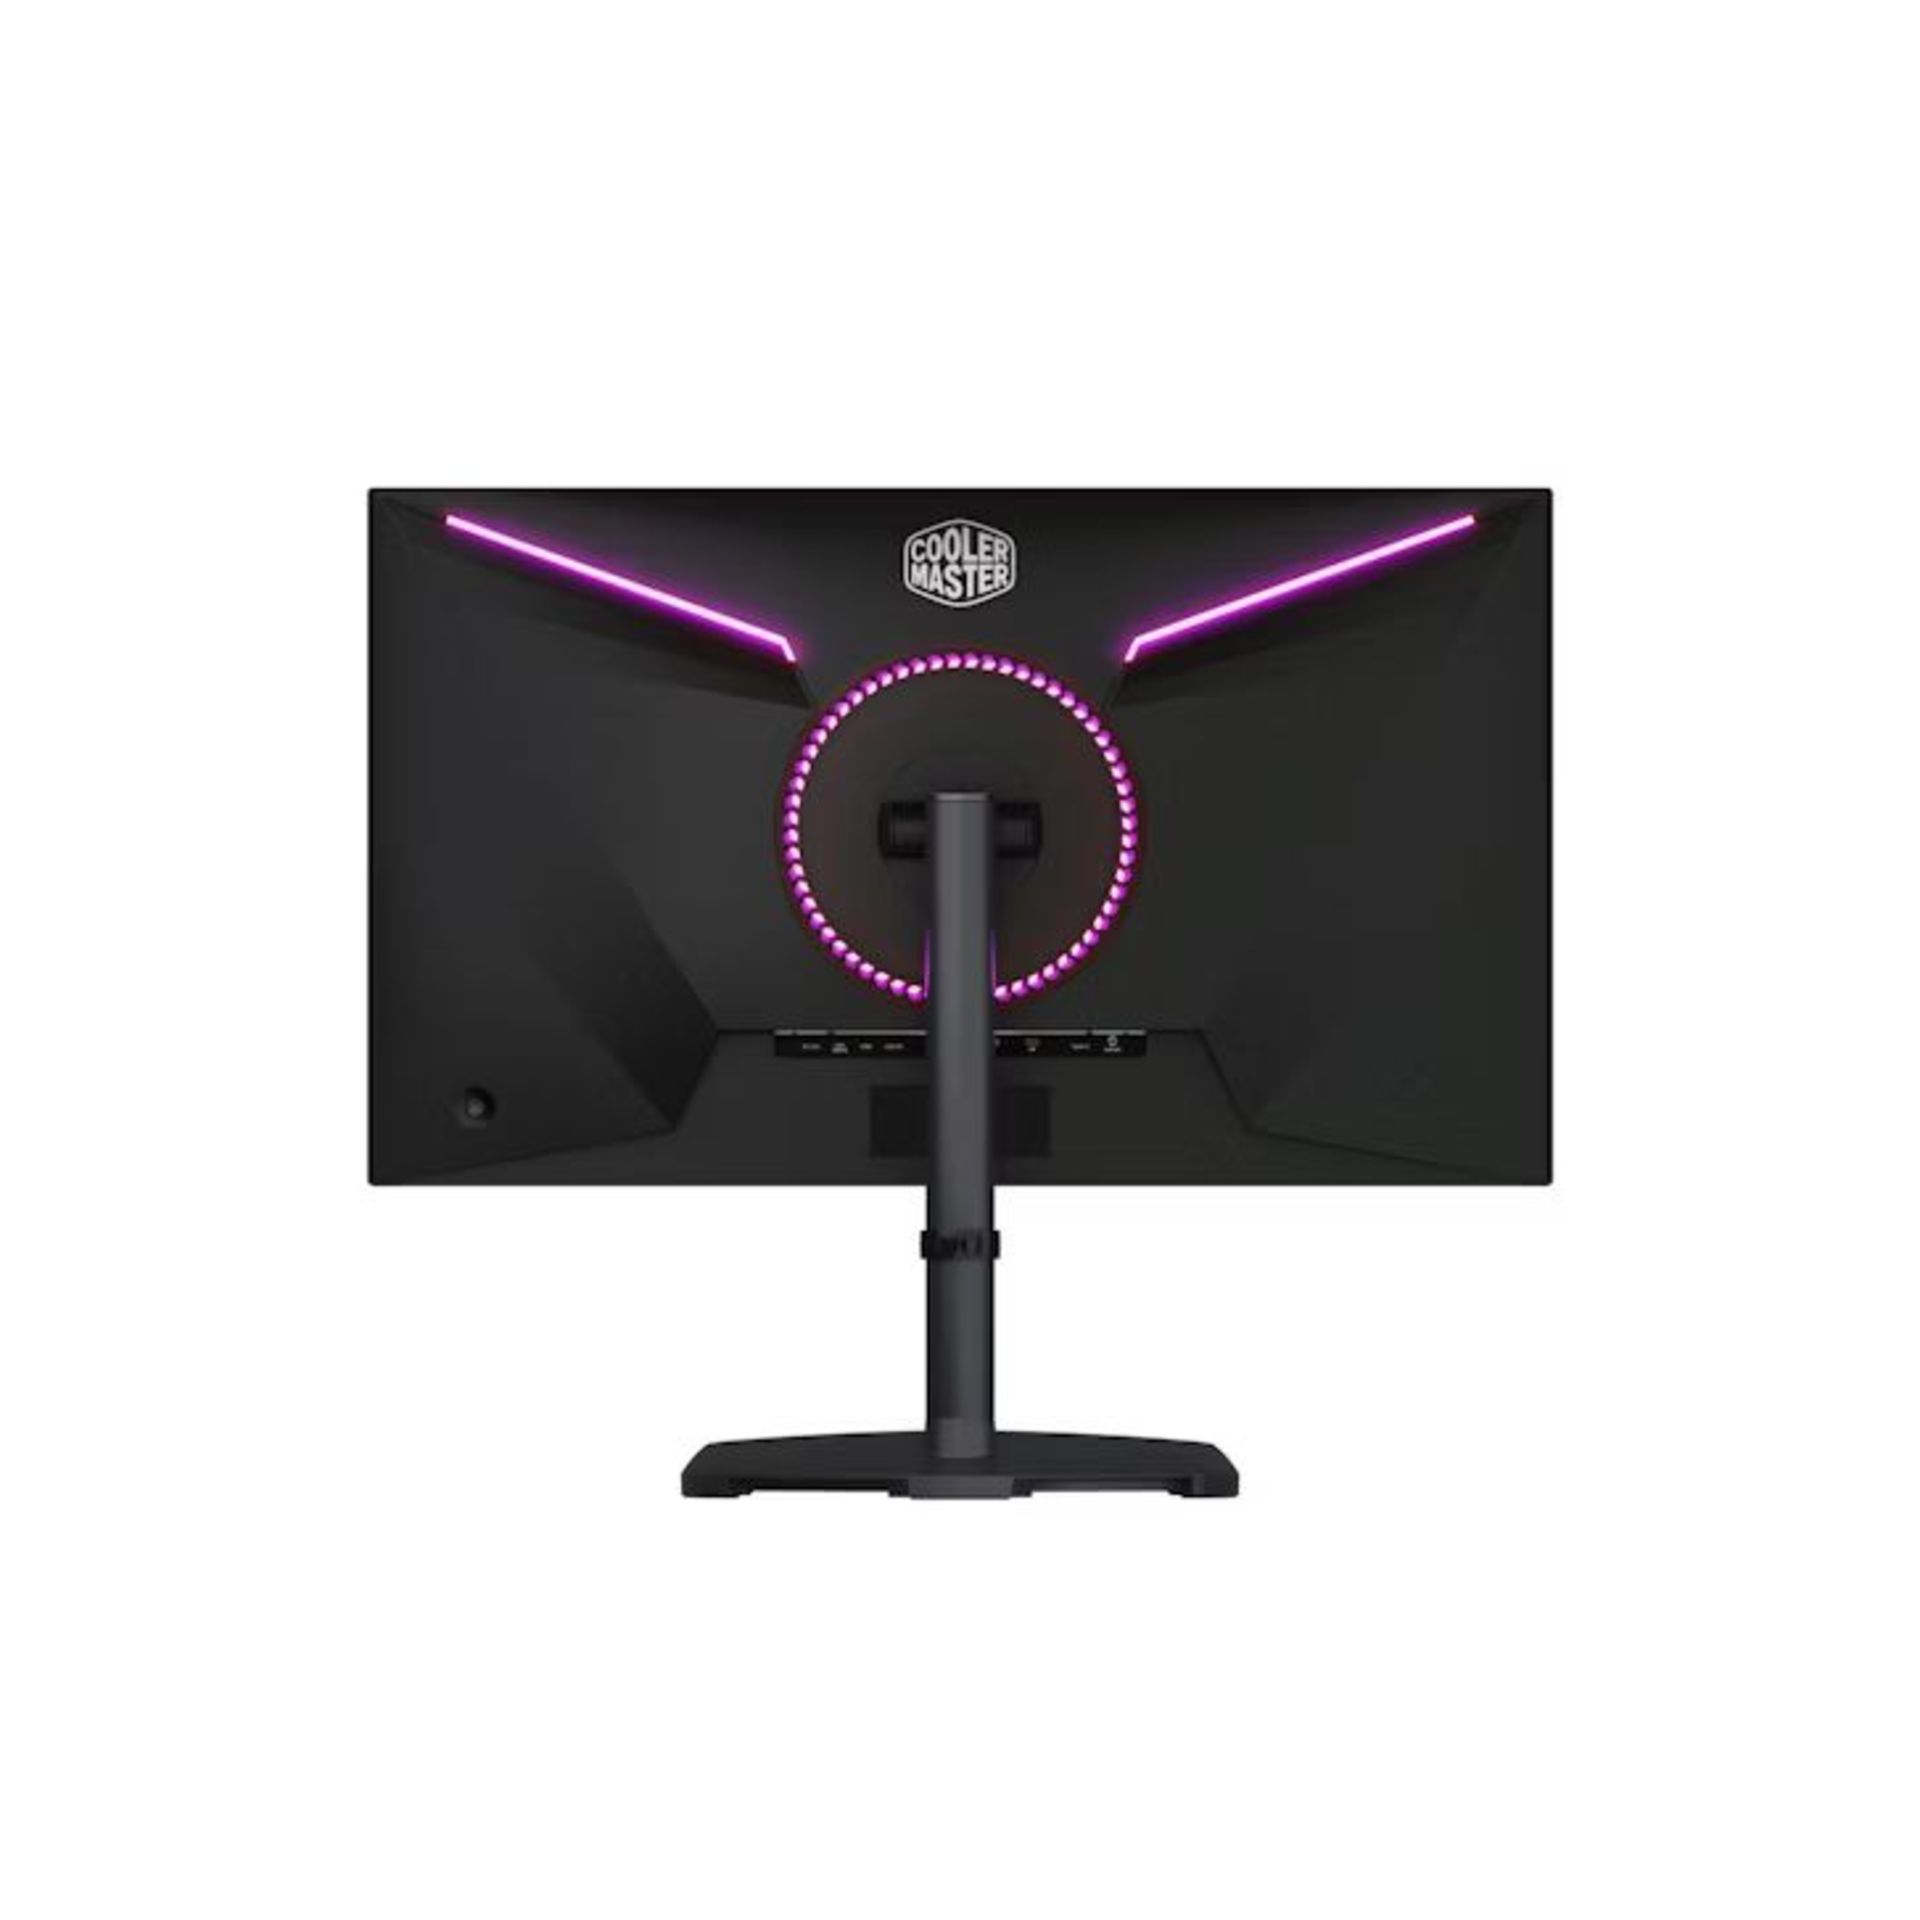 Cooler Master Tempest GP27Q 27" 2560x1440 IPS 165Hz FreeSync Mini-LED HDR Widescreen Gaming Monitor. - Image 2 of 2